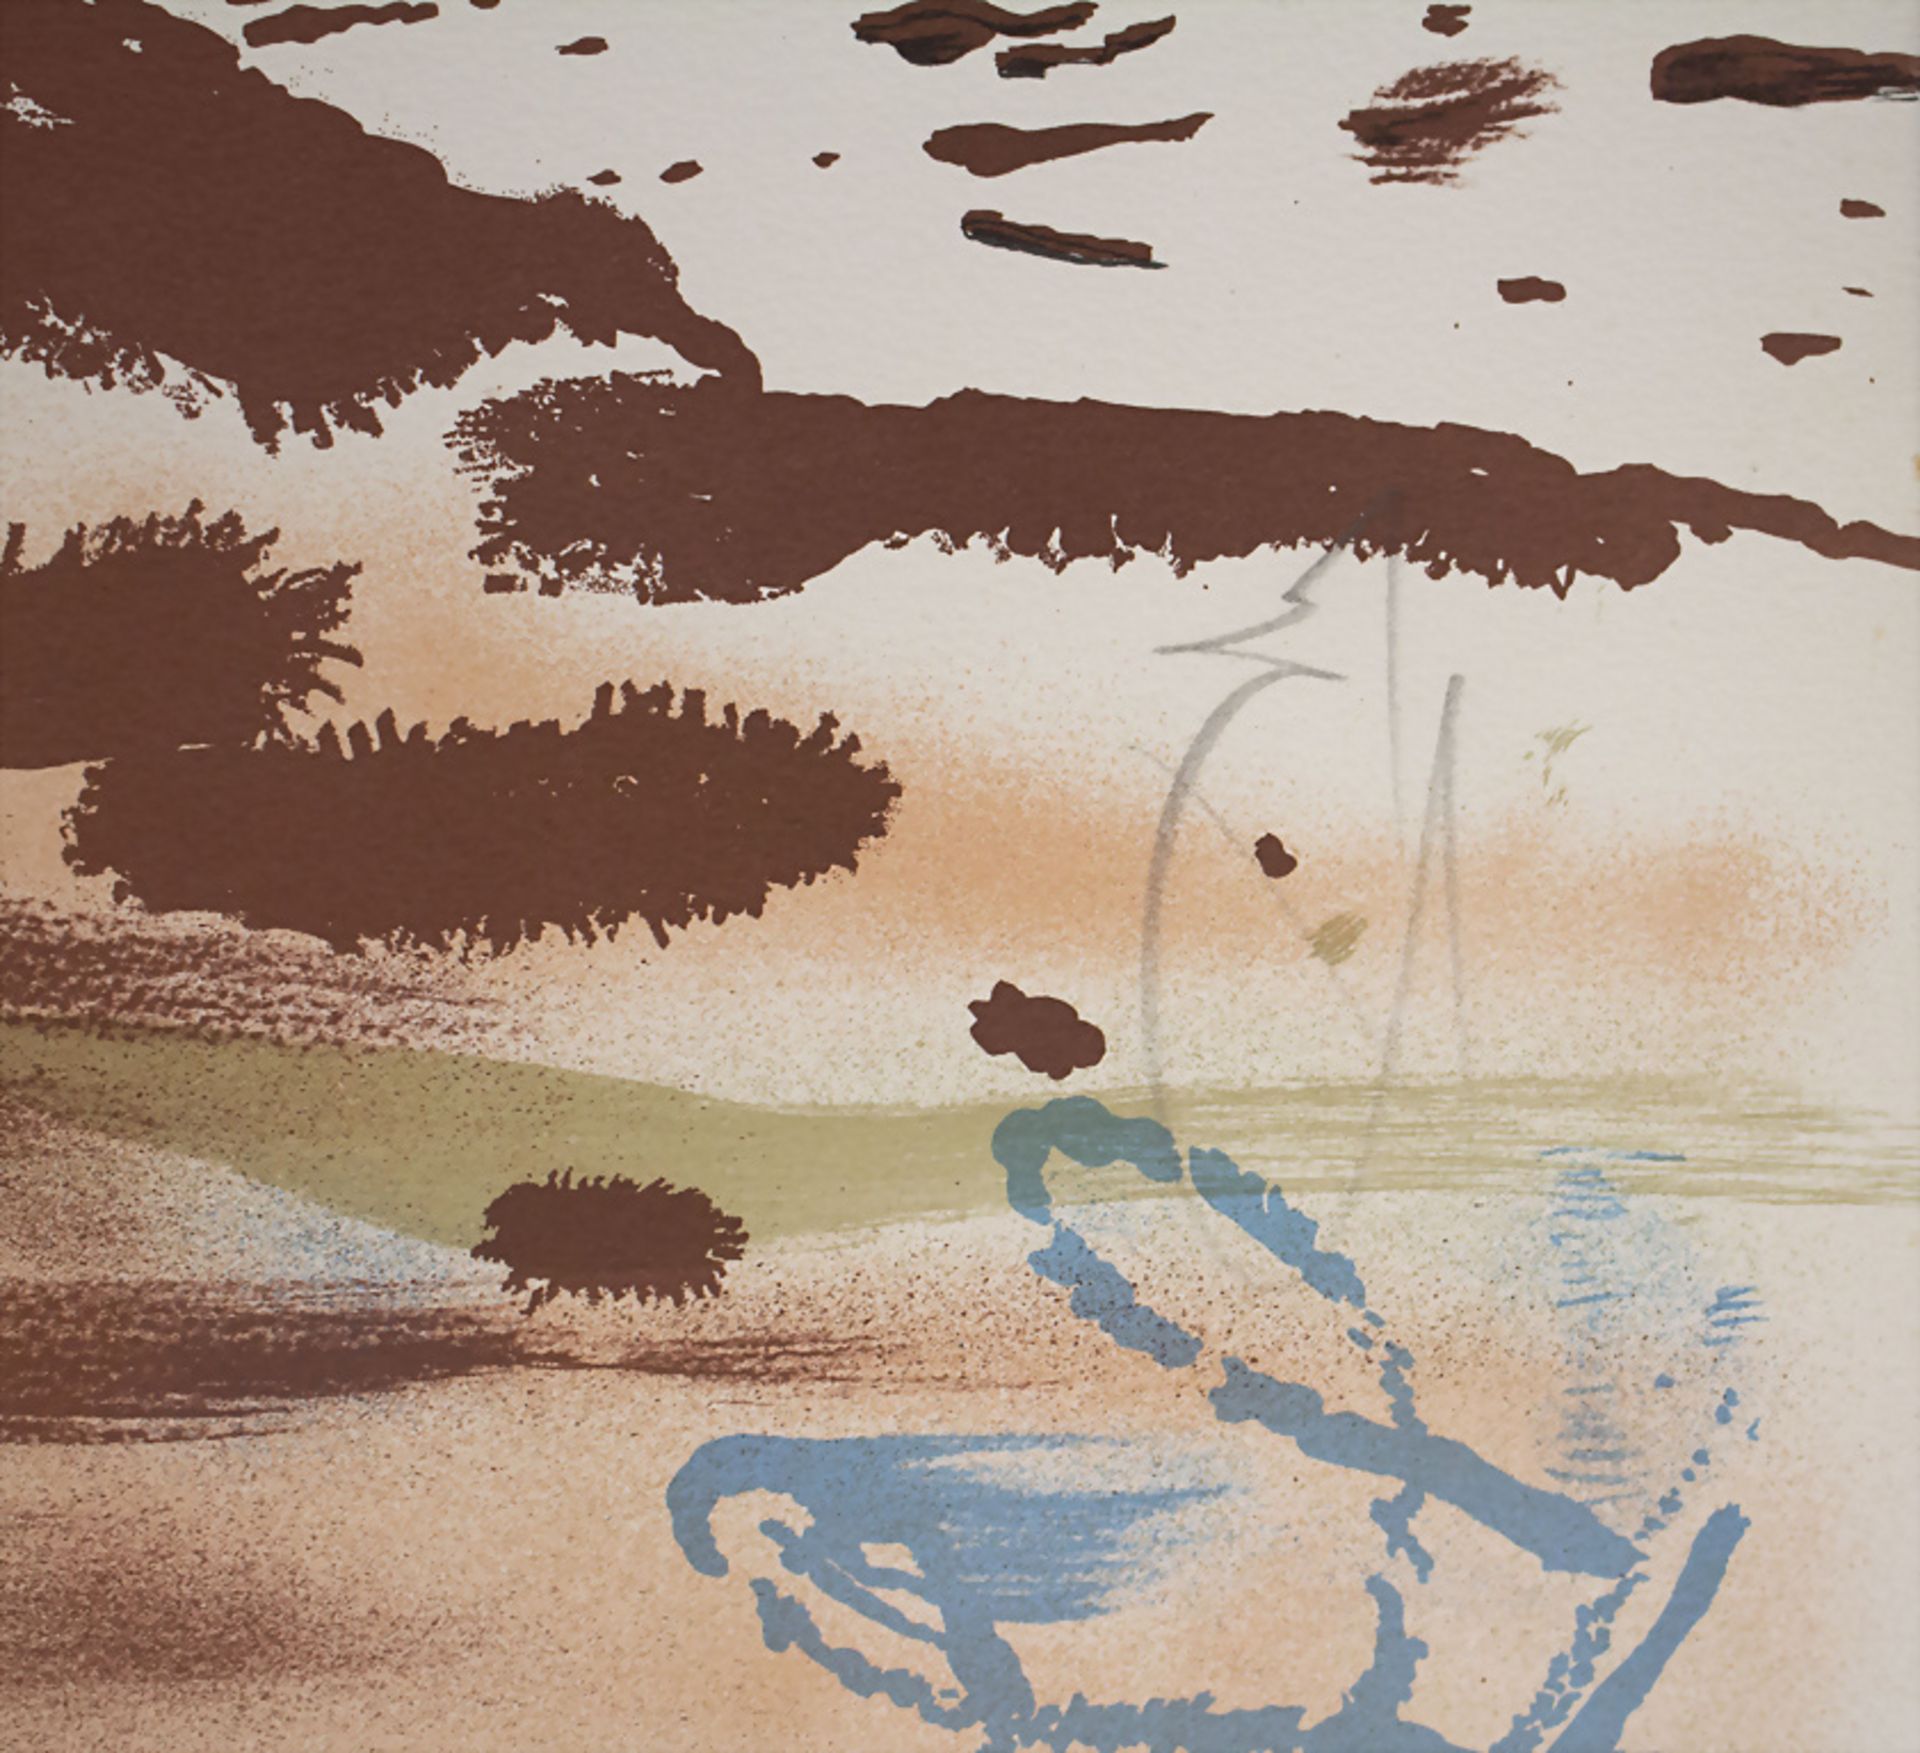 Salvador DALI (1904-1989), 'Four Seasons Suite - Summer' / 'Summer from the Seasons Suite, 1972 - Image 3 of 4